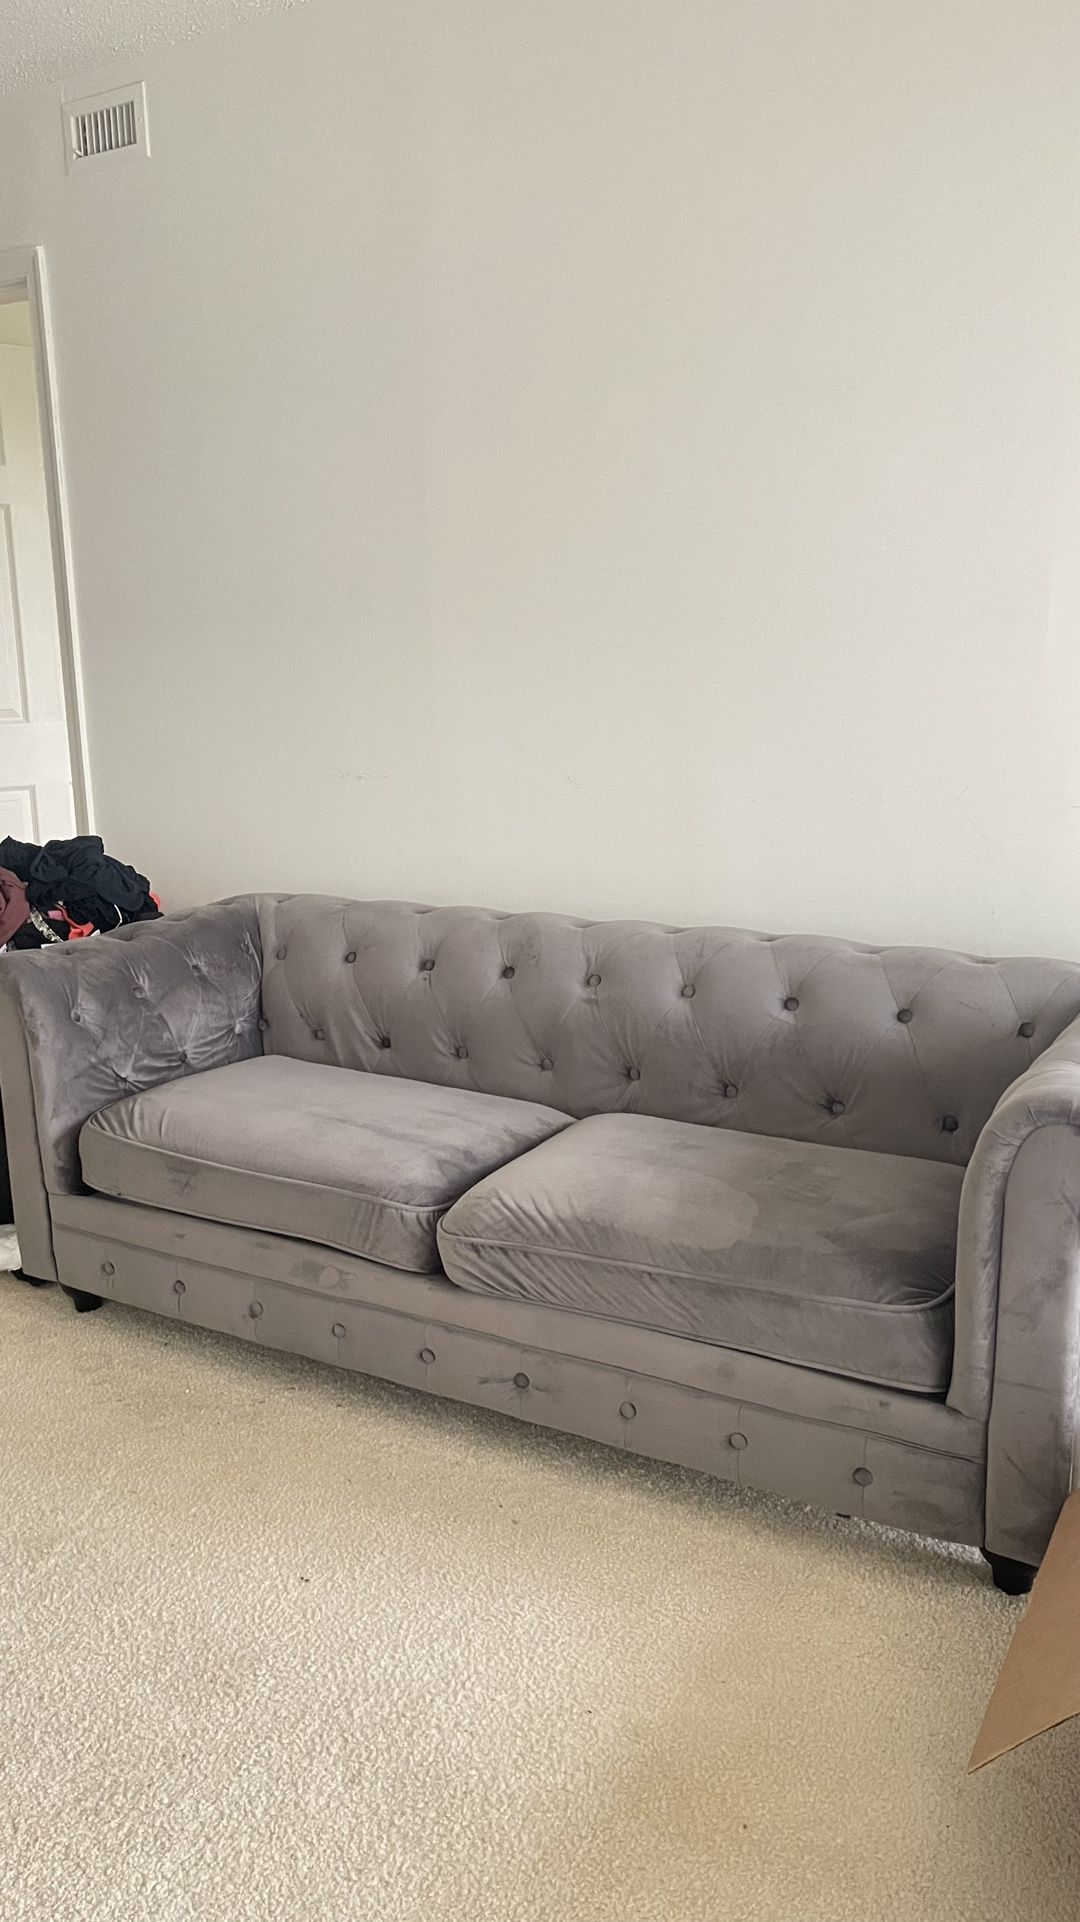 Grey/Gray Suede Tufted Couch